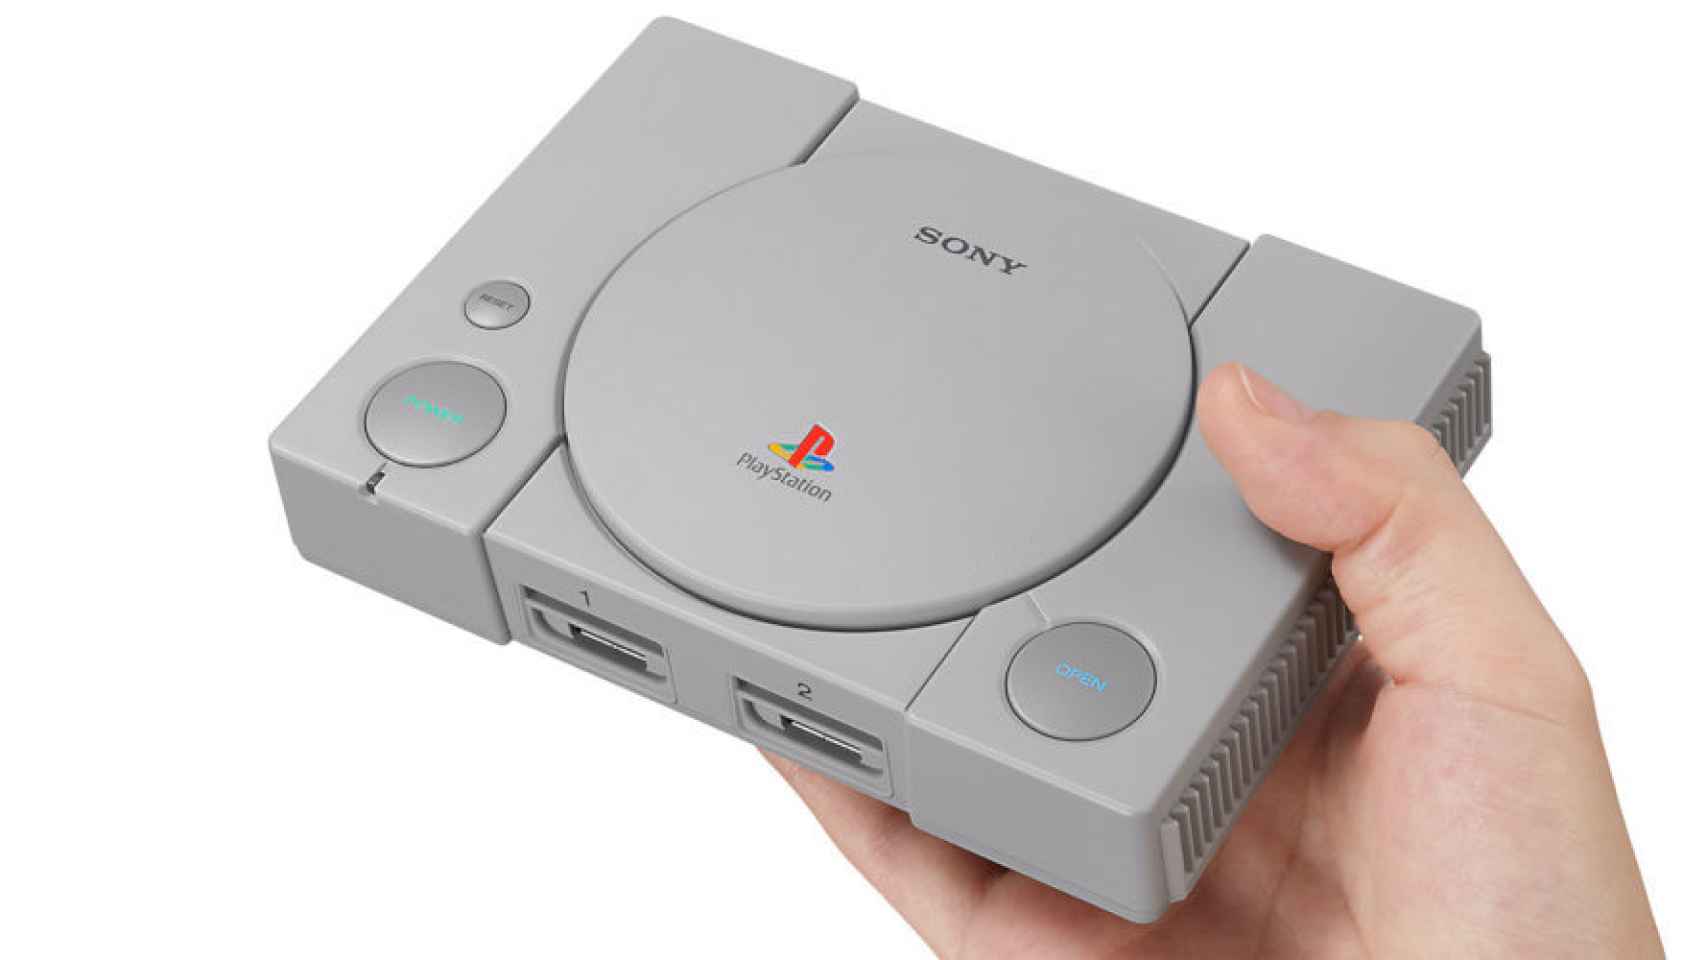 playstation classic 2